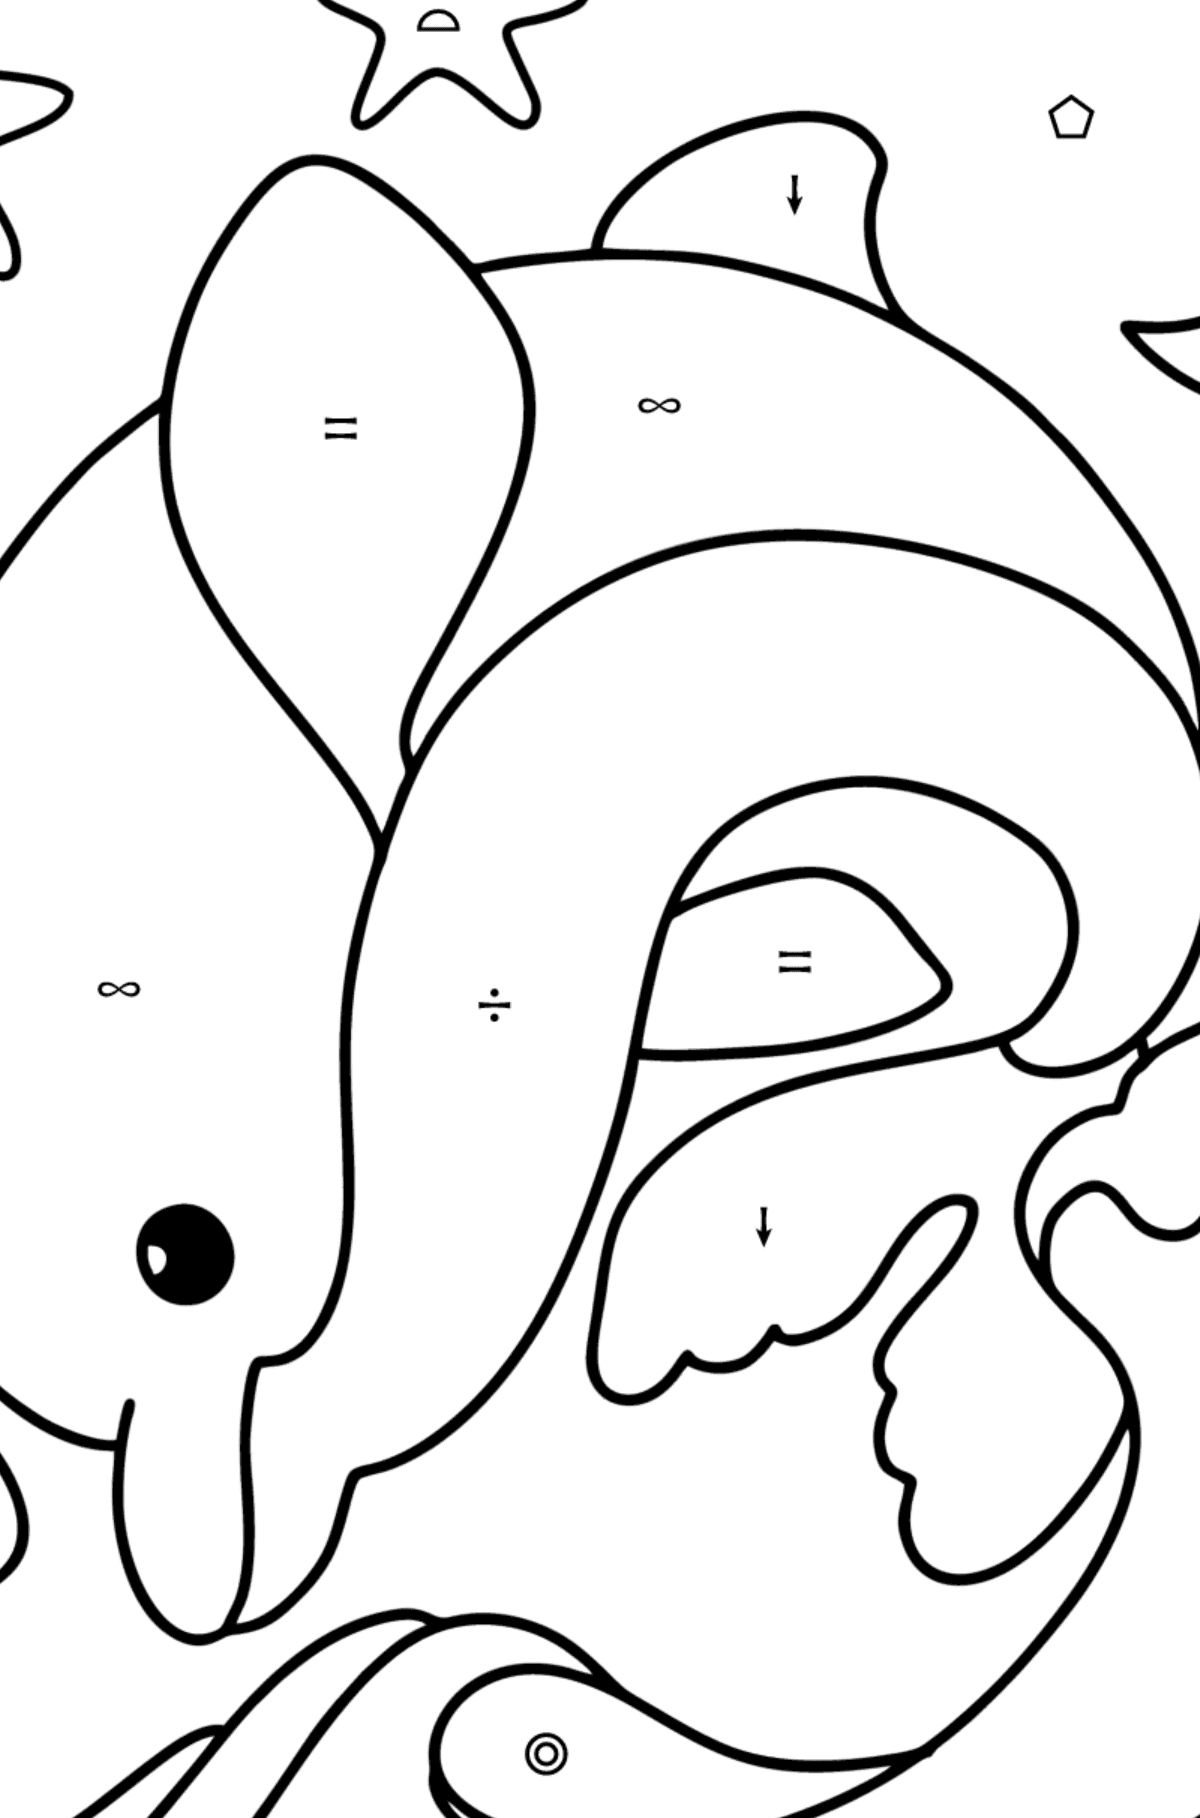 Dolphin in the Sea coloring page - Coloring by Symbols and Geometric Shapes for Kids